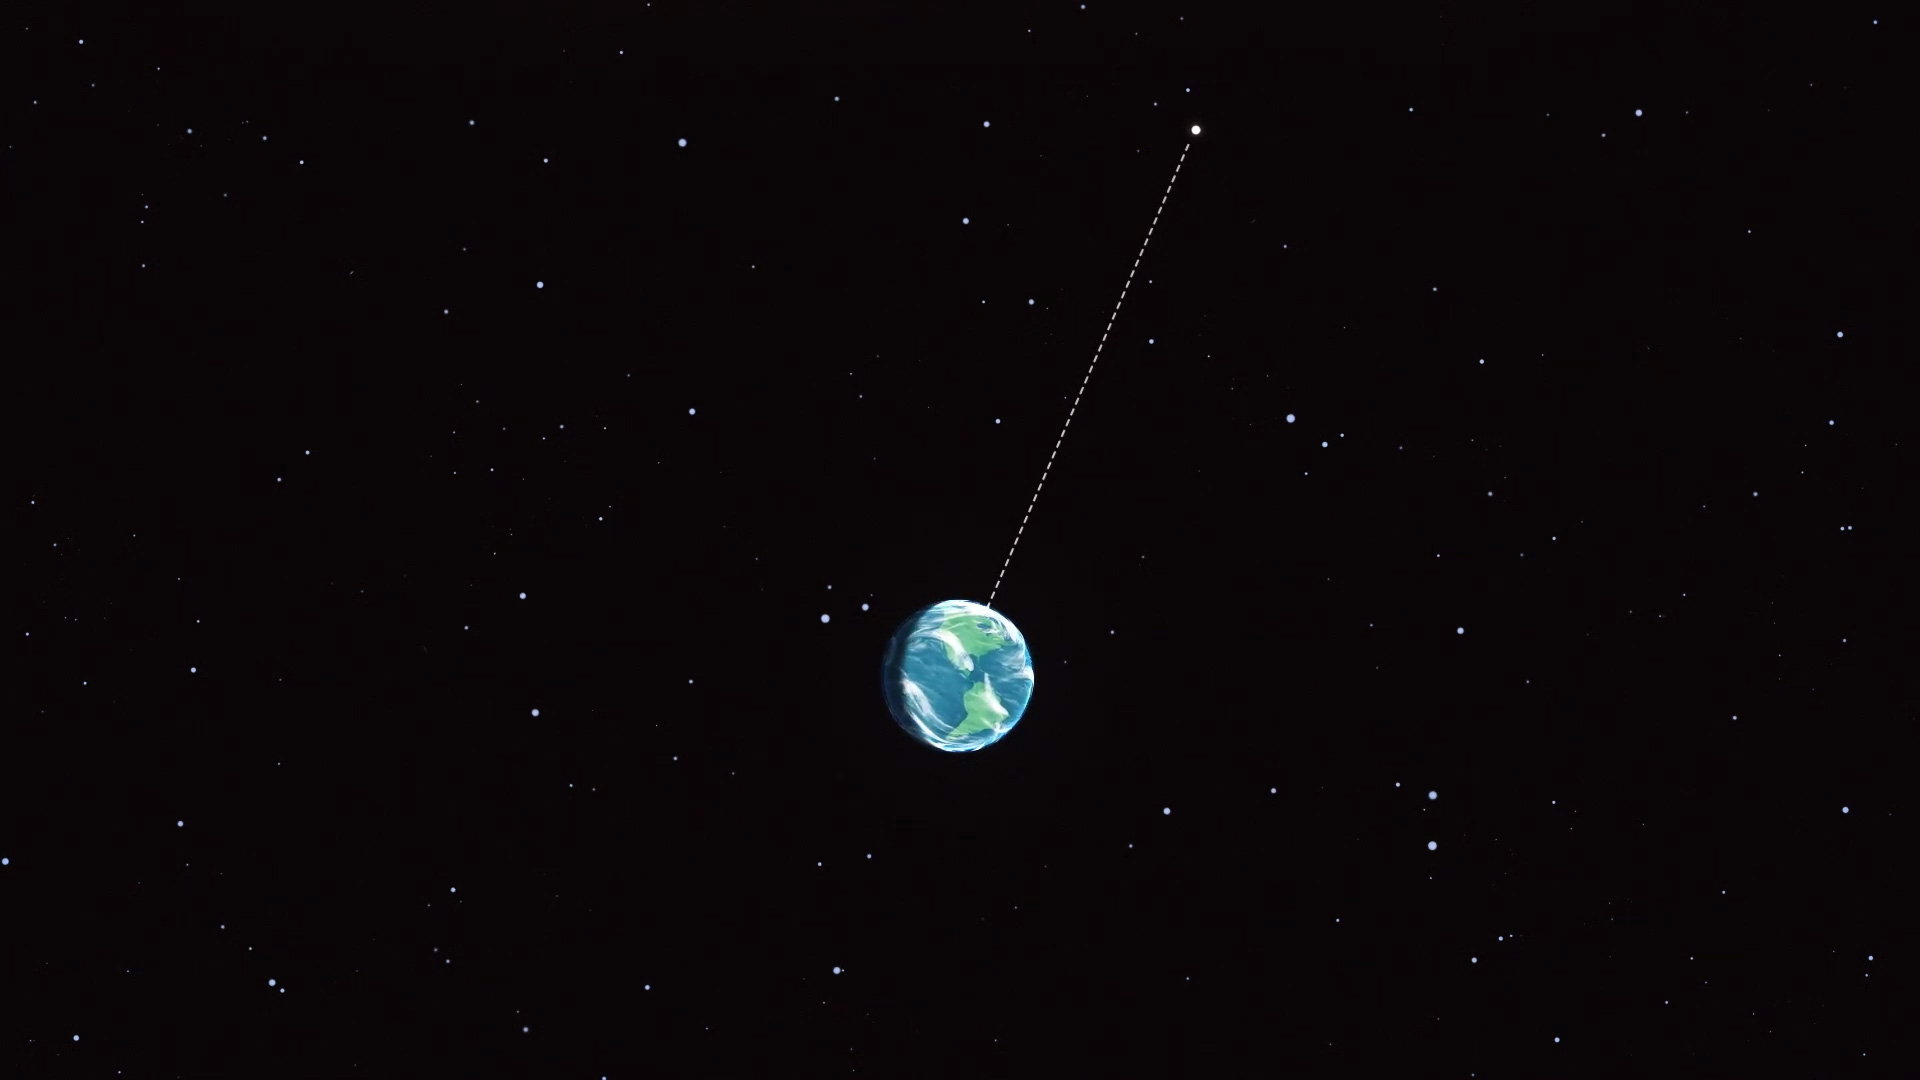 Location of North Star above Earth